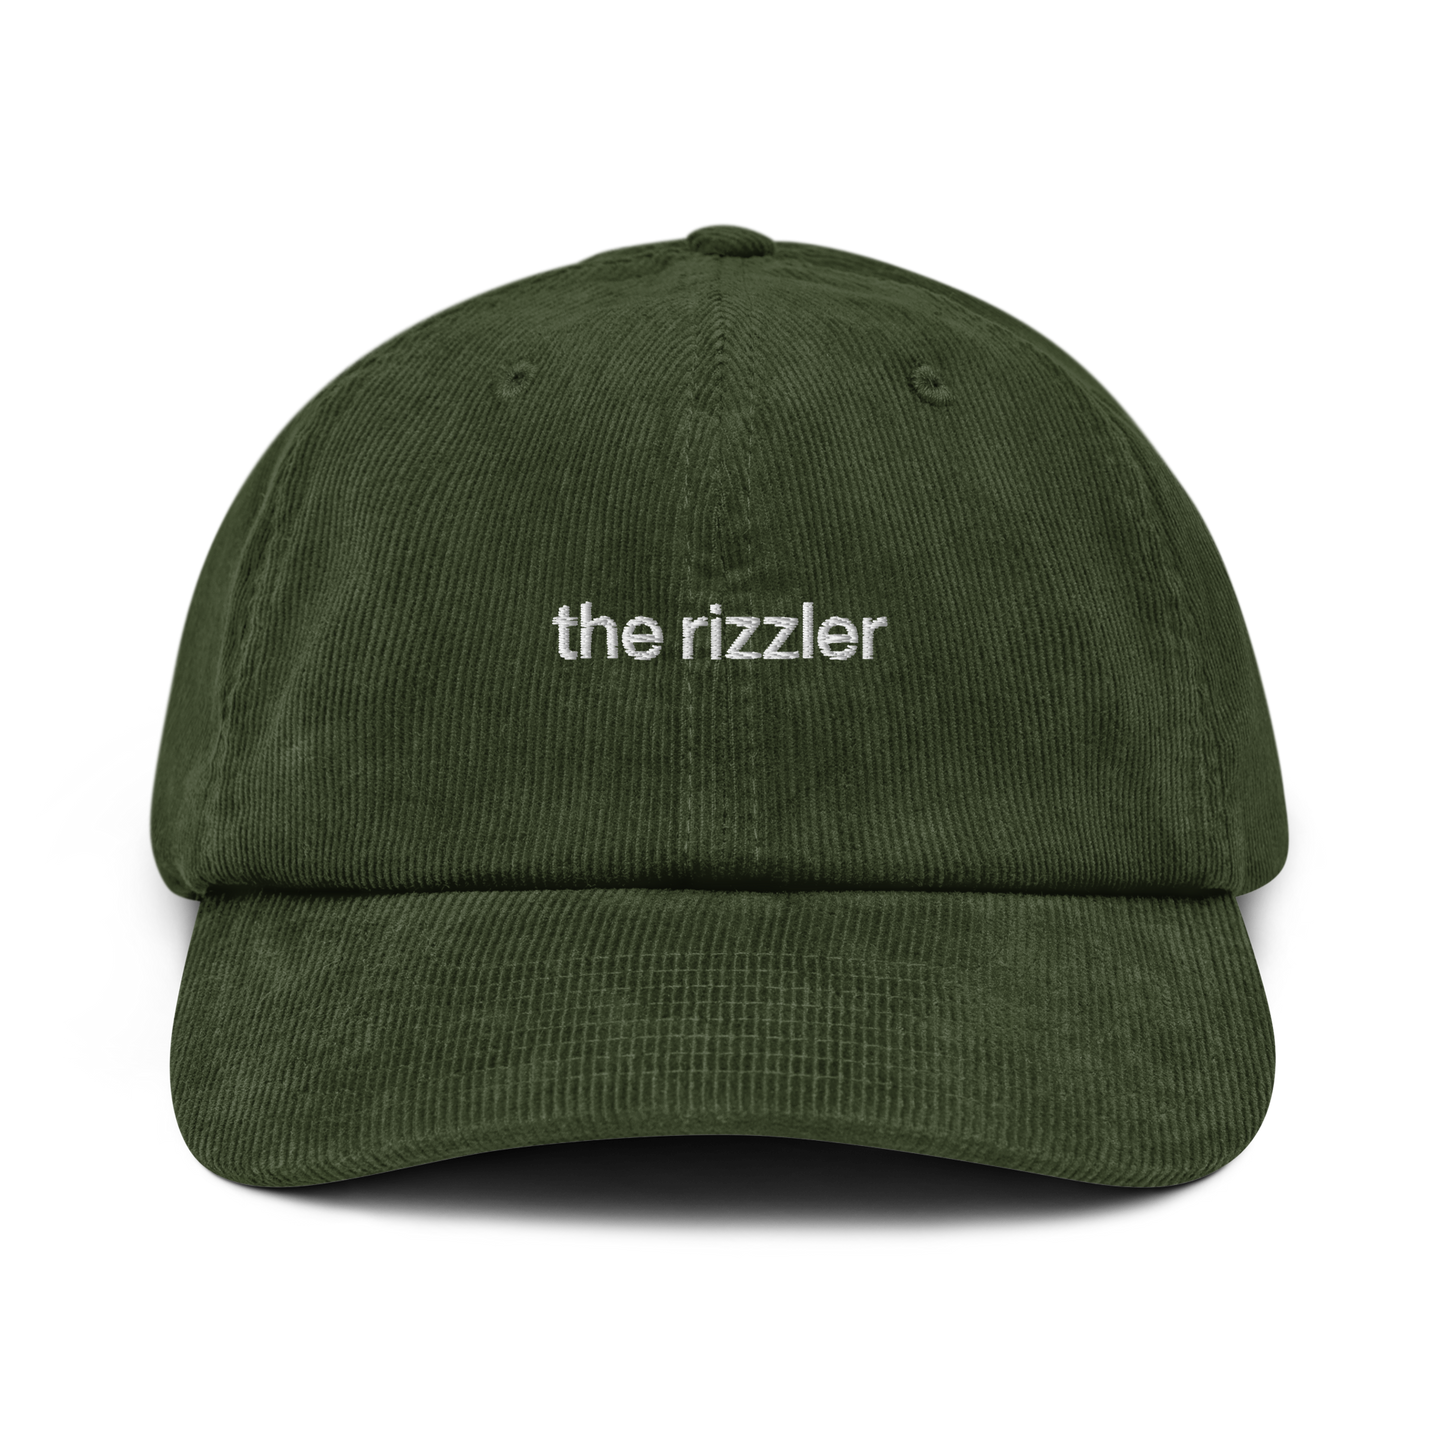 the rizzler hat